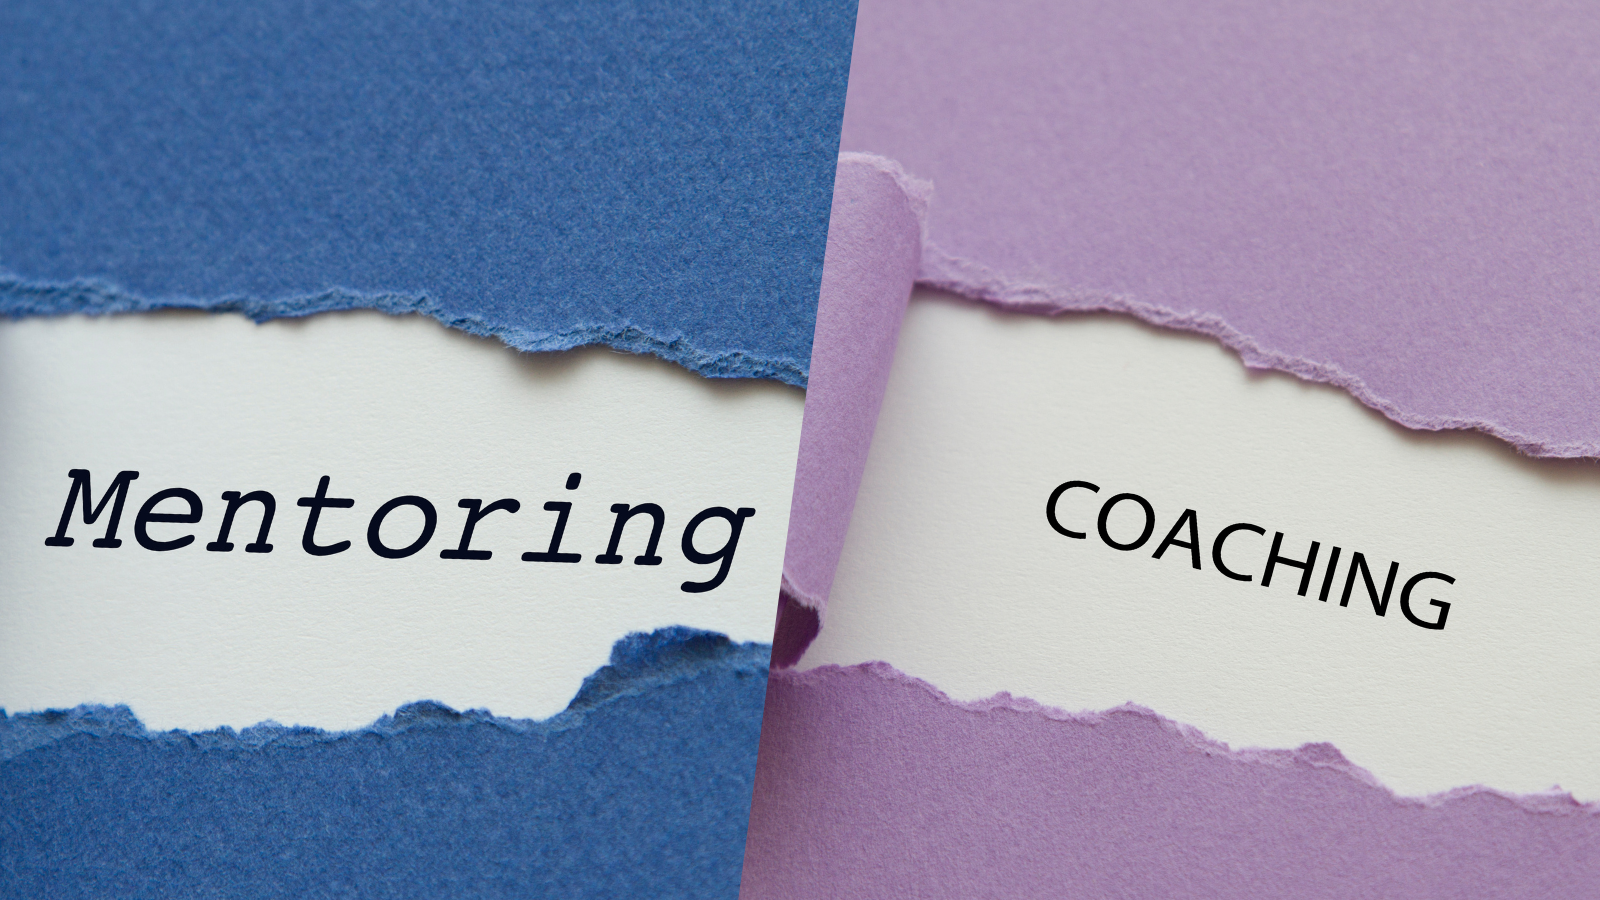 Does your organization need Coaching or Mentoring